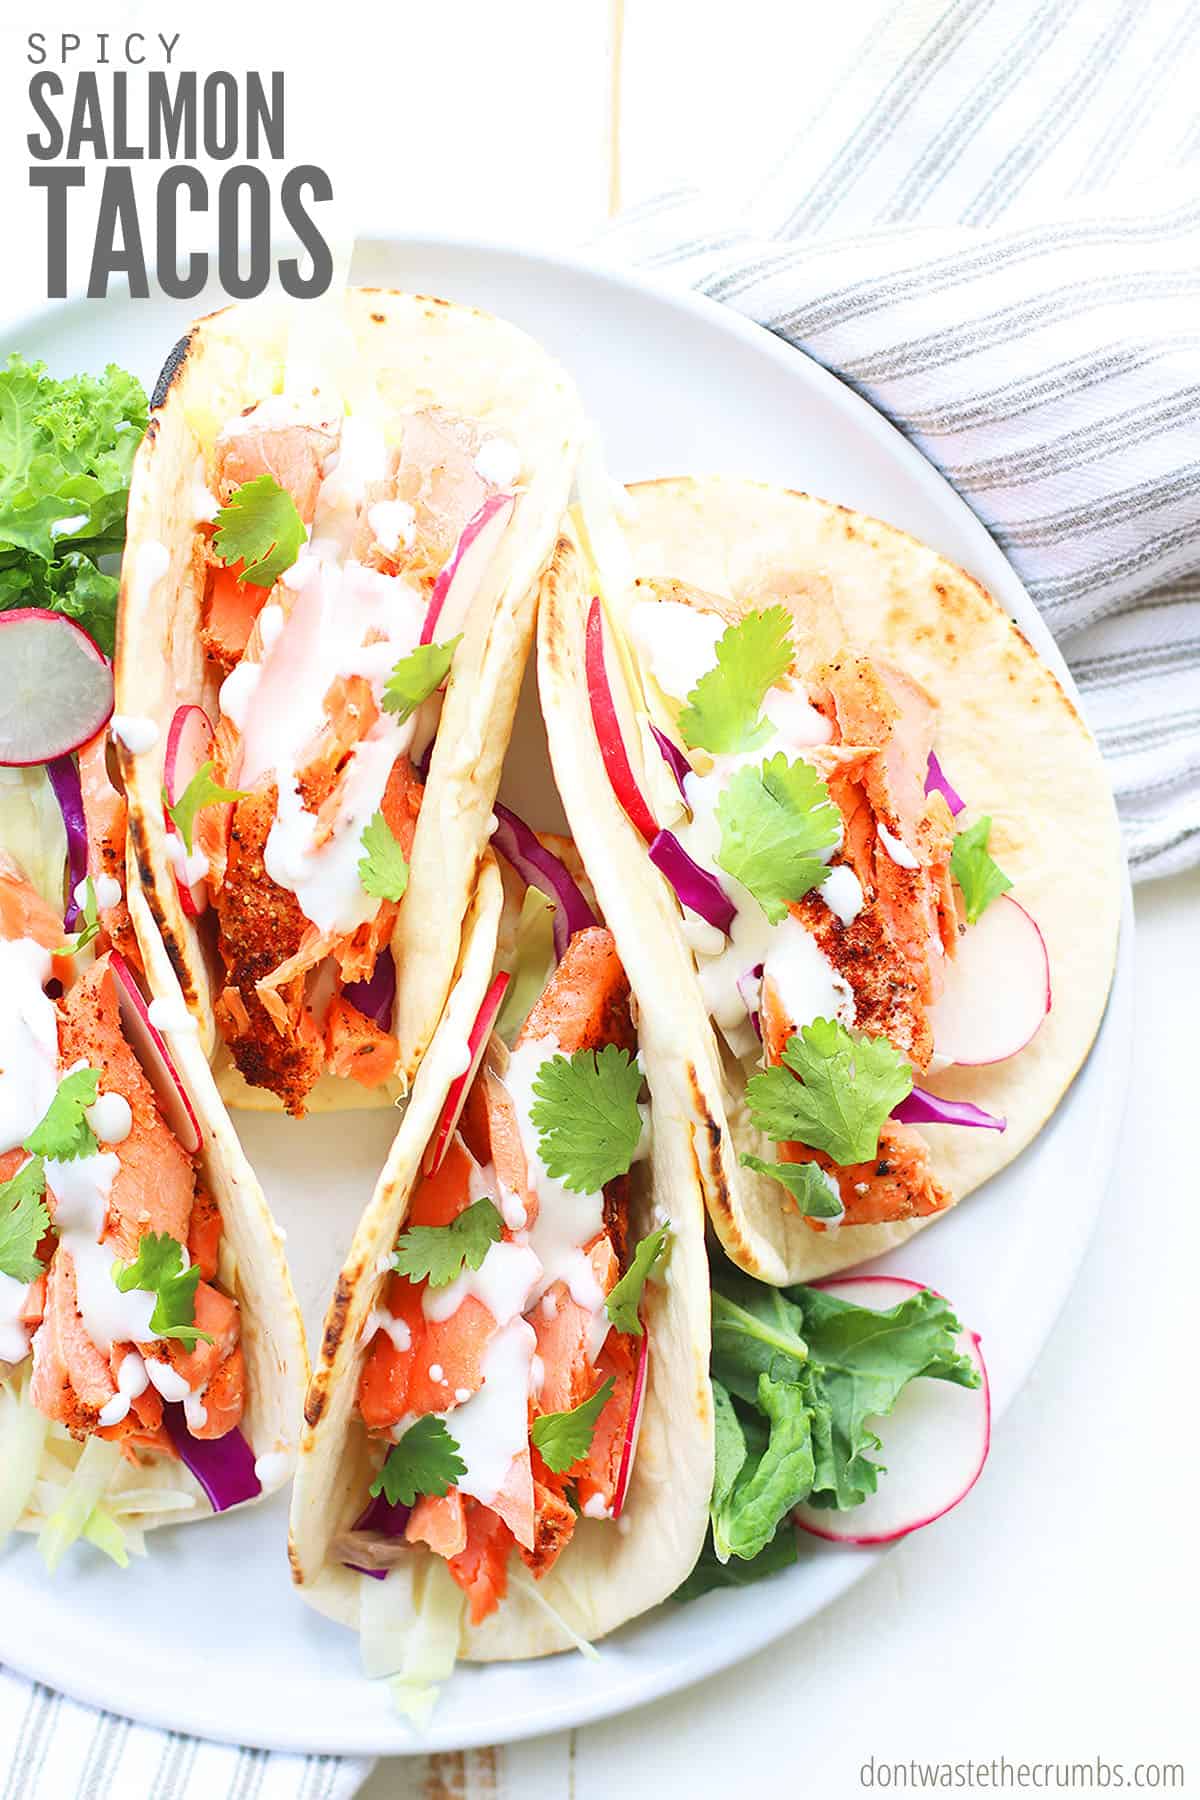 These salmon tacos are super quick & easy to make, oh-so-flavorful, and perfect for busy weeknights. Plus, they’re adaptable to your spice preference and customizable with your favorite toppings. Serve perfectly with my black beans recipe and Instant Pot sweet potatoes.